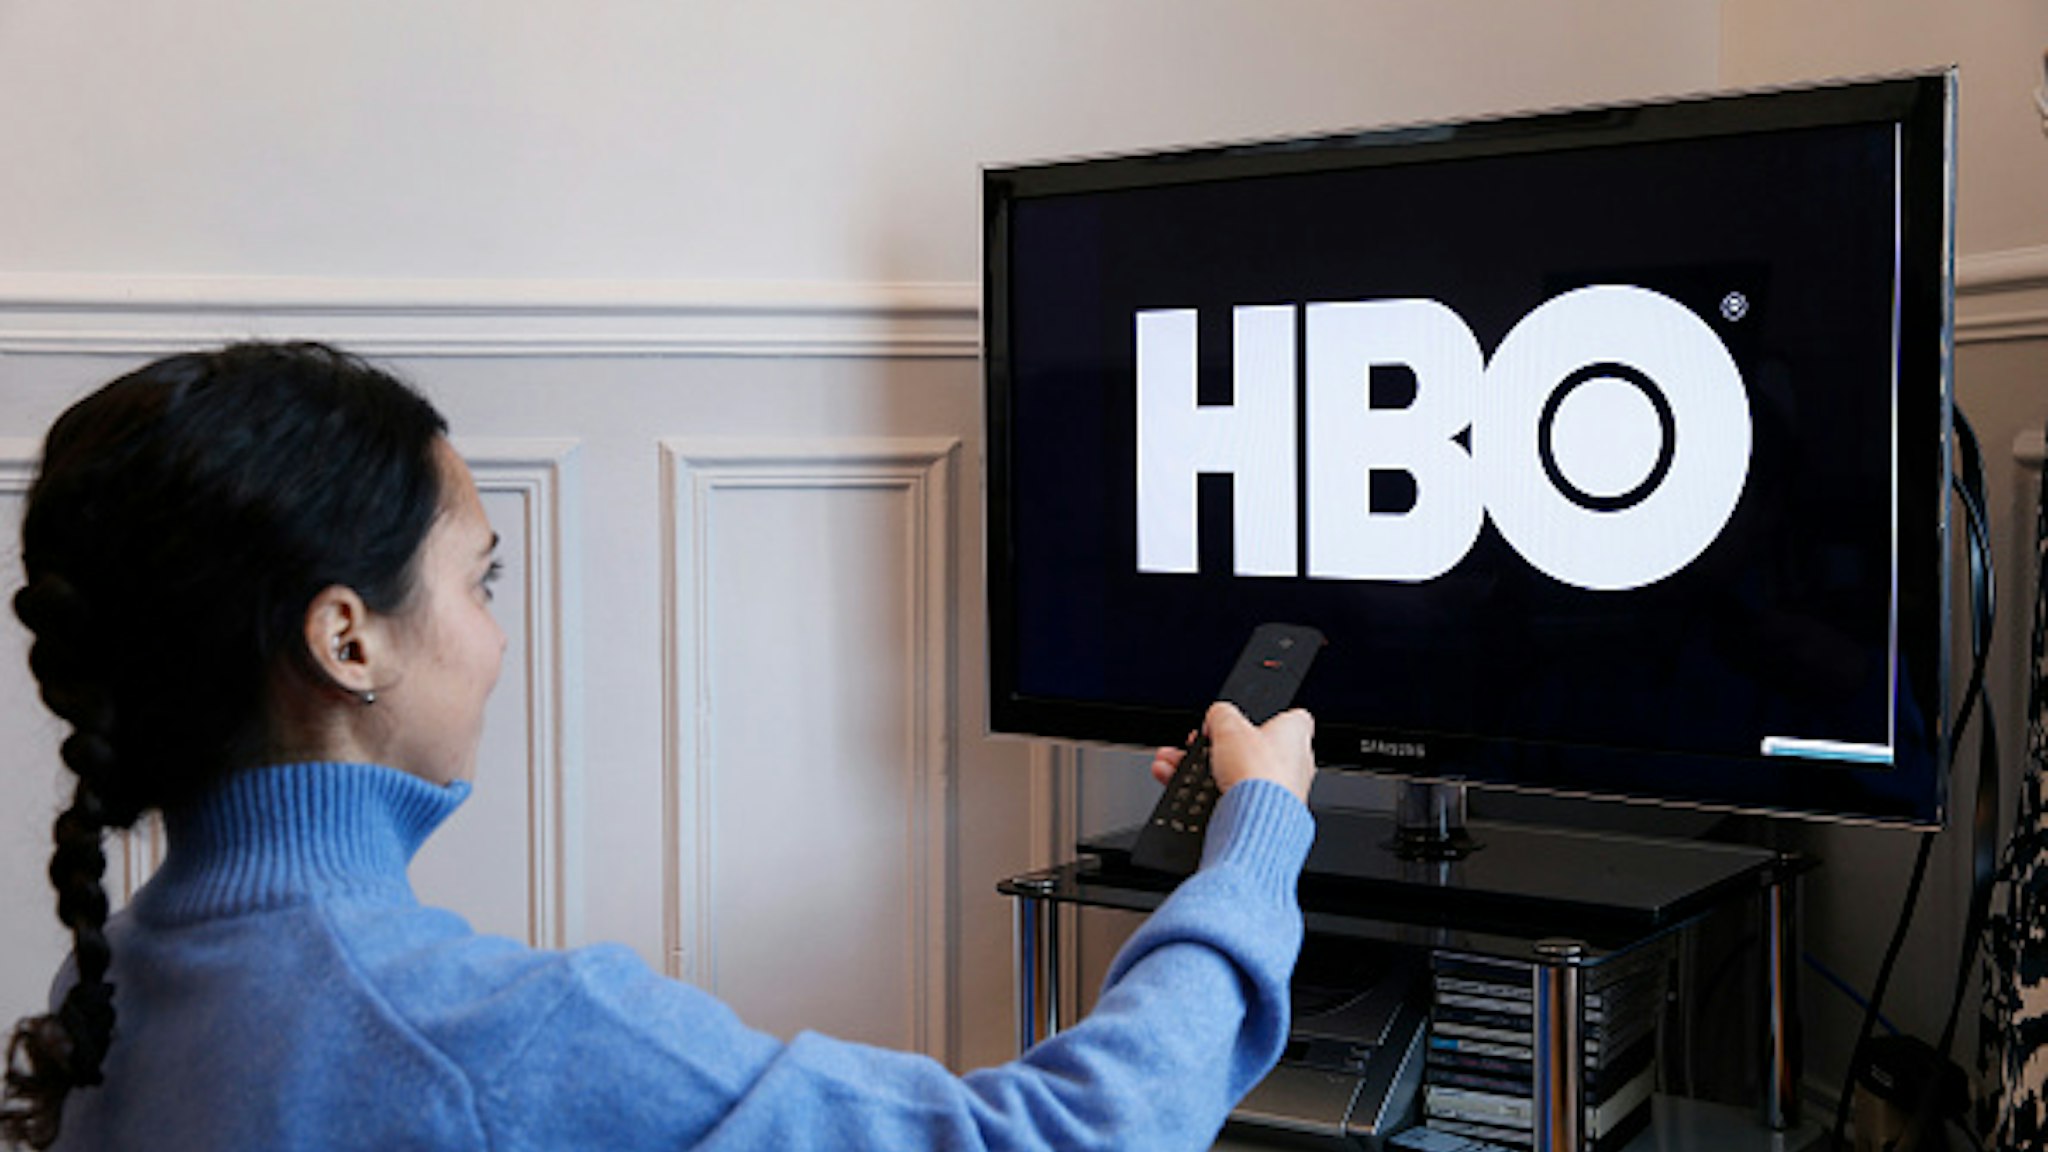 PARIS, FRANCE - NOVEMBER 21: In this photo illustration, the HBO logo is displayed on a television screen on November 21, 2019 in Paris, France. HBO is an American pay TV channel that produces and broadcasts TV shows.